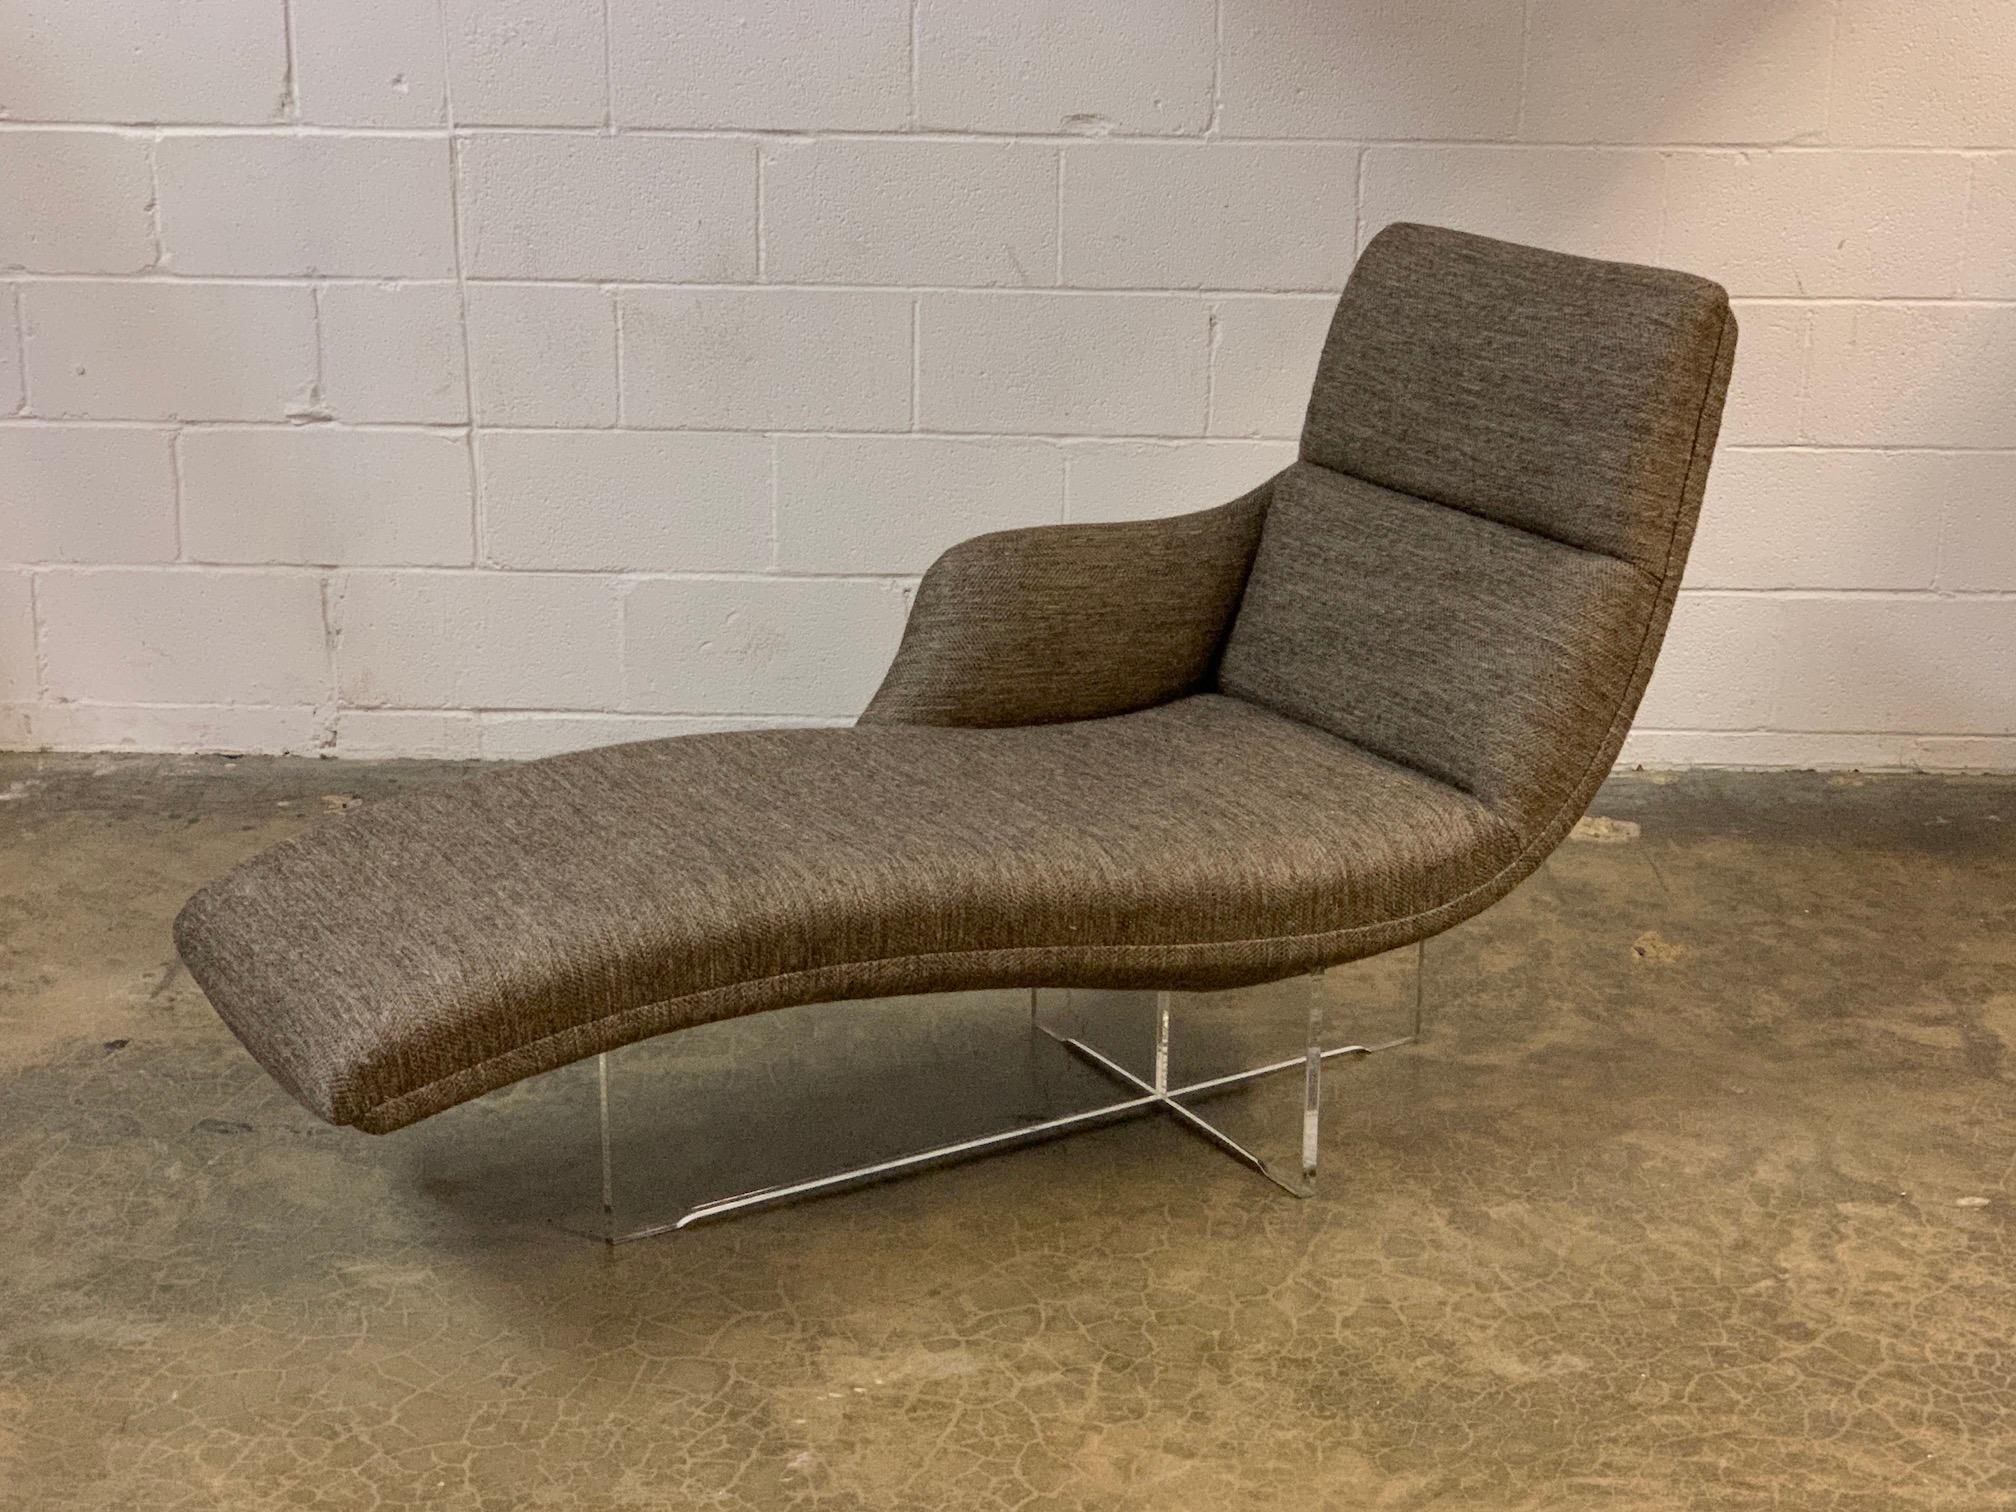 The Erica chaise lounge designed by Vladimir Kagan. Perfectly restored and reupholstered in a beautiful hand woven fabric.